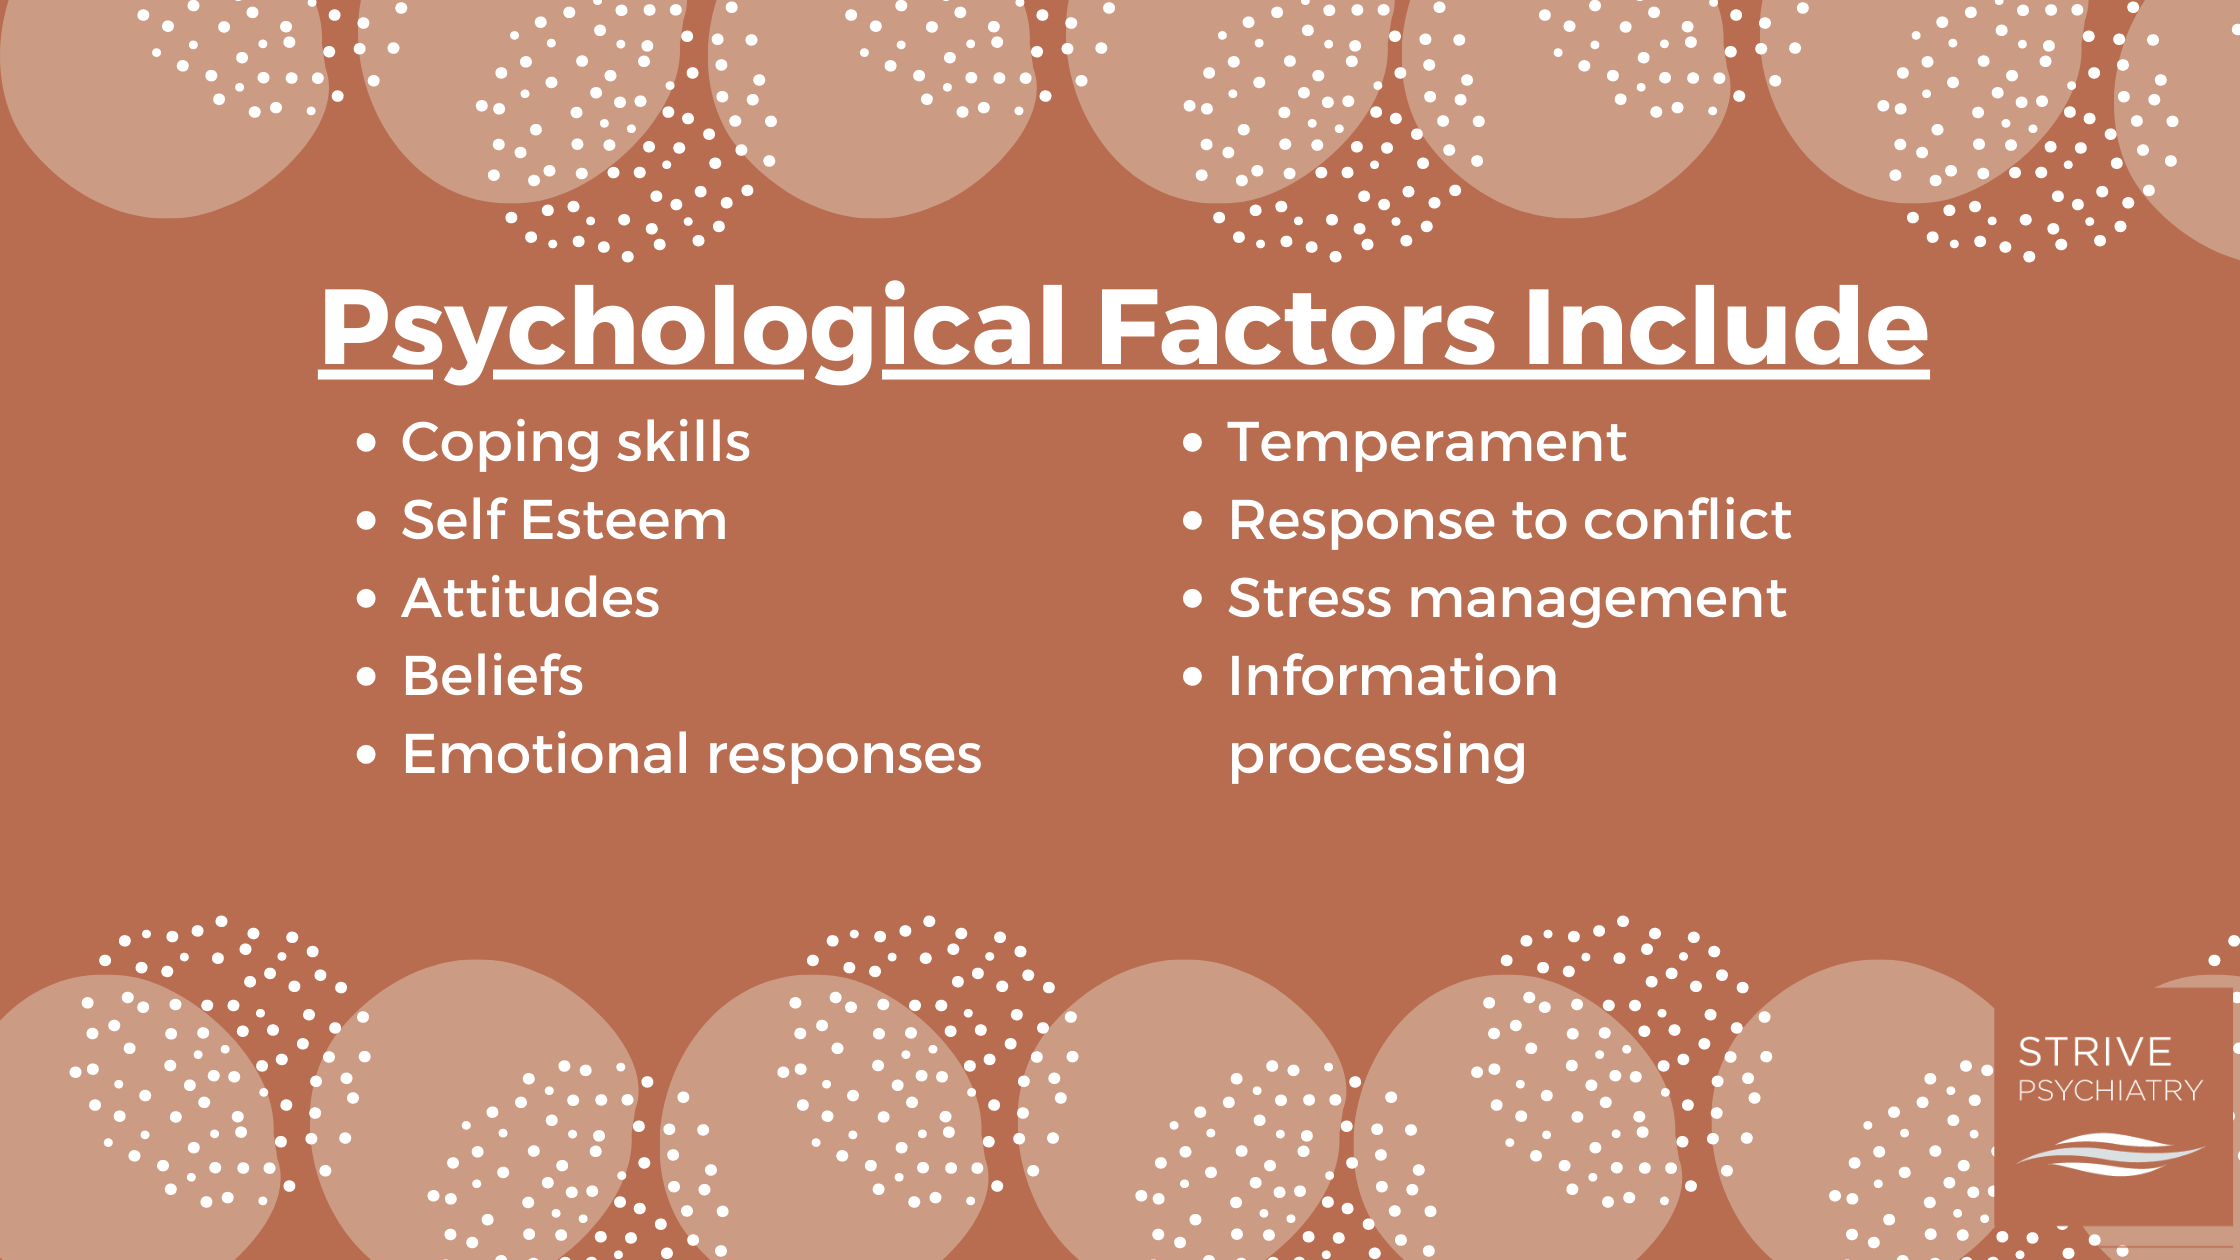 Infographic that says "Psychological factors include: coping skills, self esteem, attitudes, beliefs, emotional responses, temperament, response to conflict, stress management, information processing."